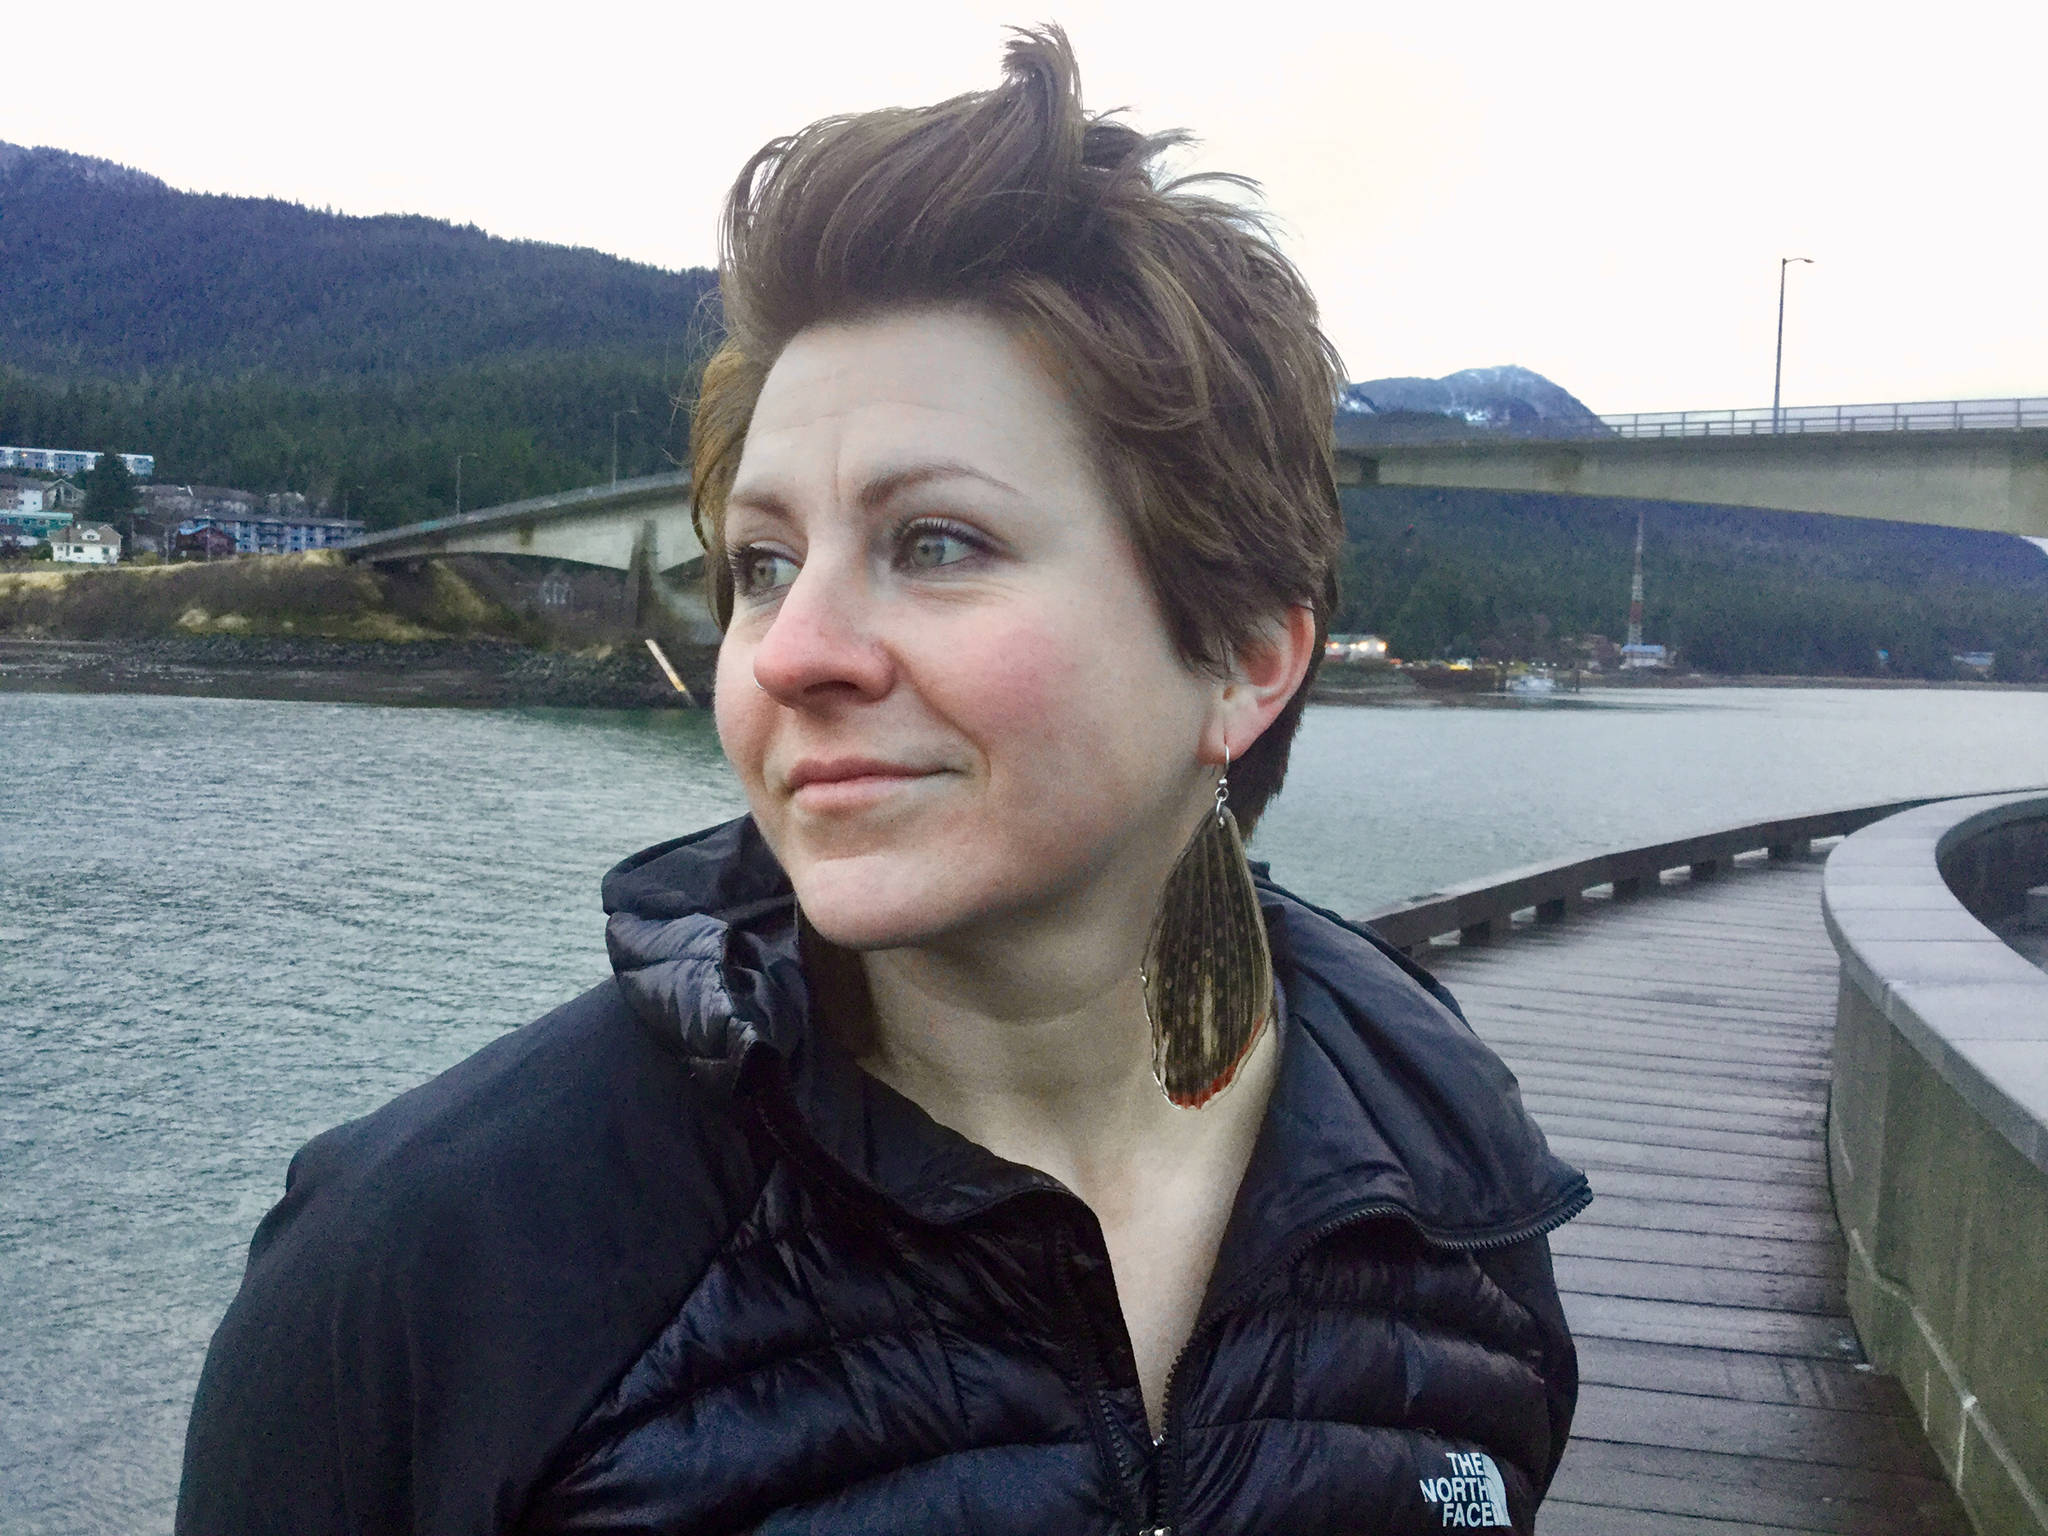 Artist Julienne Pacheco, who makes jewelry out of fish skin and other natural materials, poses on the downtown Juneau Seawalk with earrings made out of arctic grayling dorsal fins. (Courtesy Photo | Julienne Pacheco)